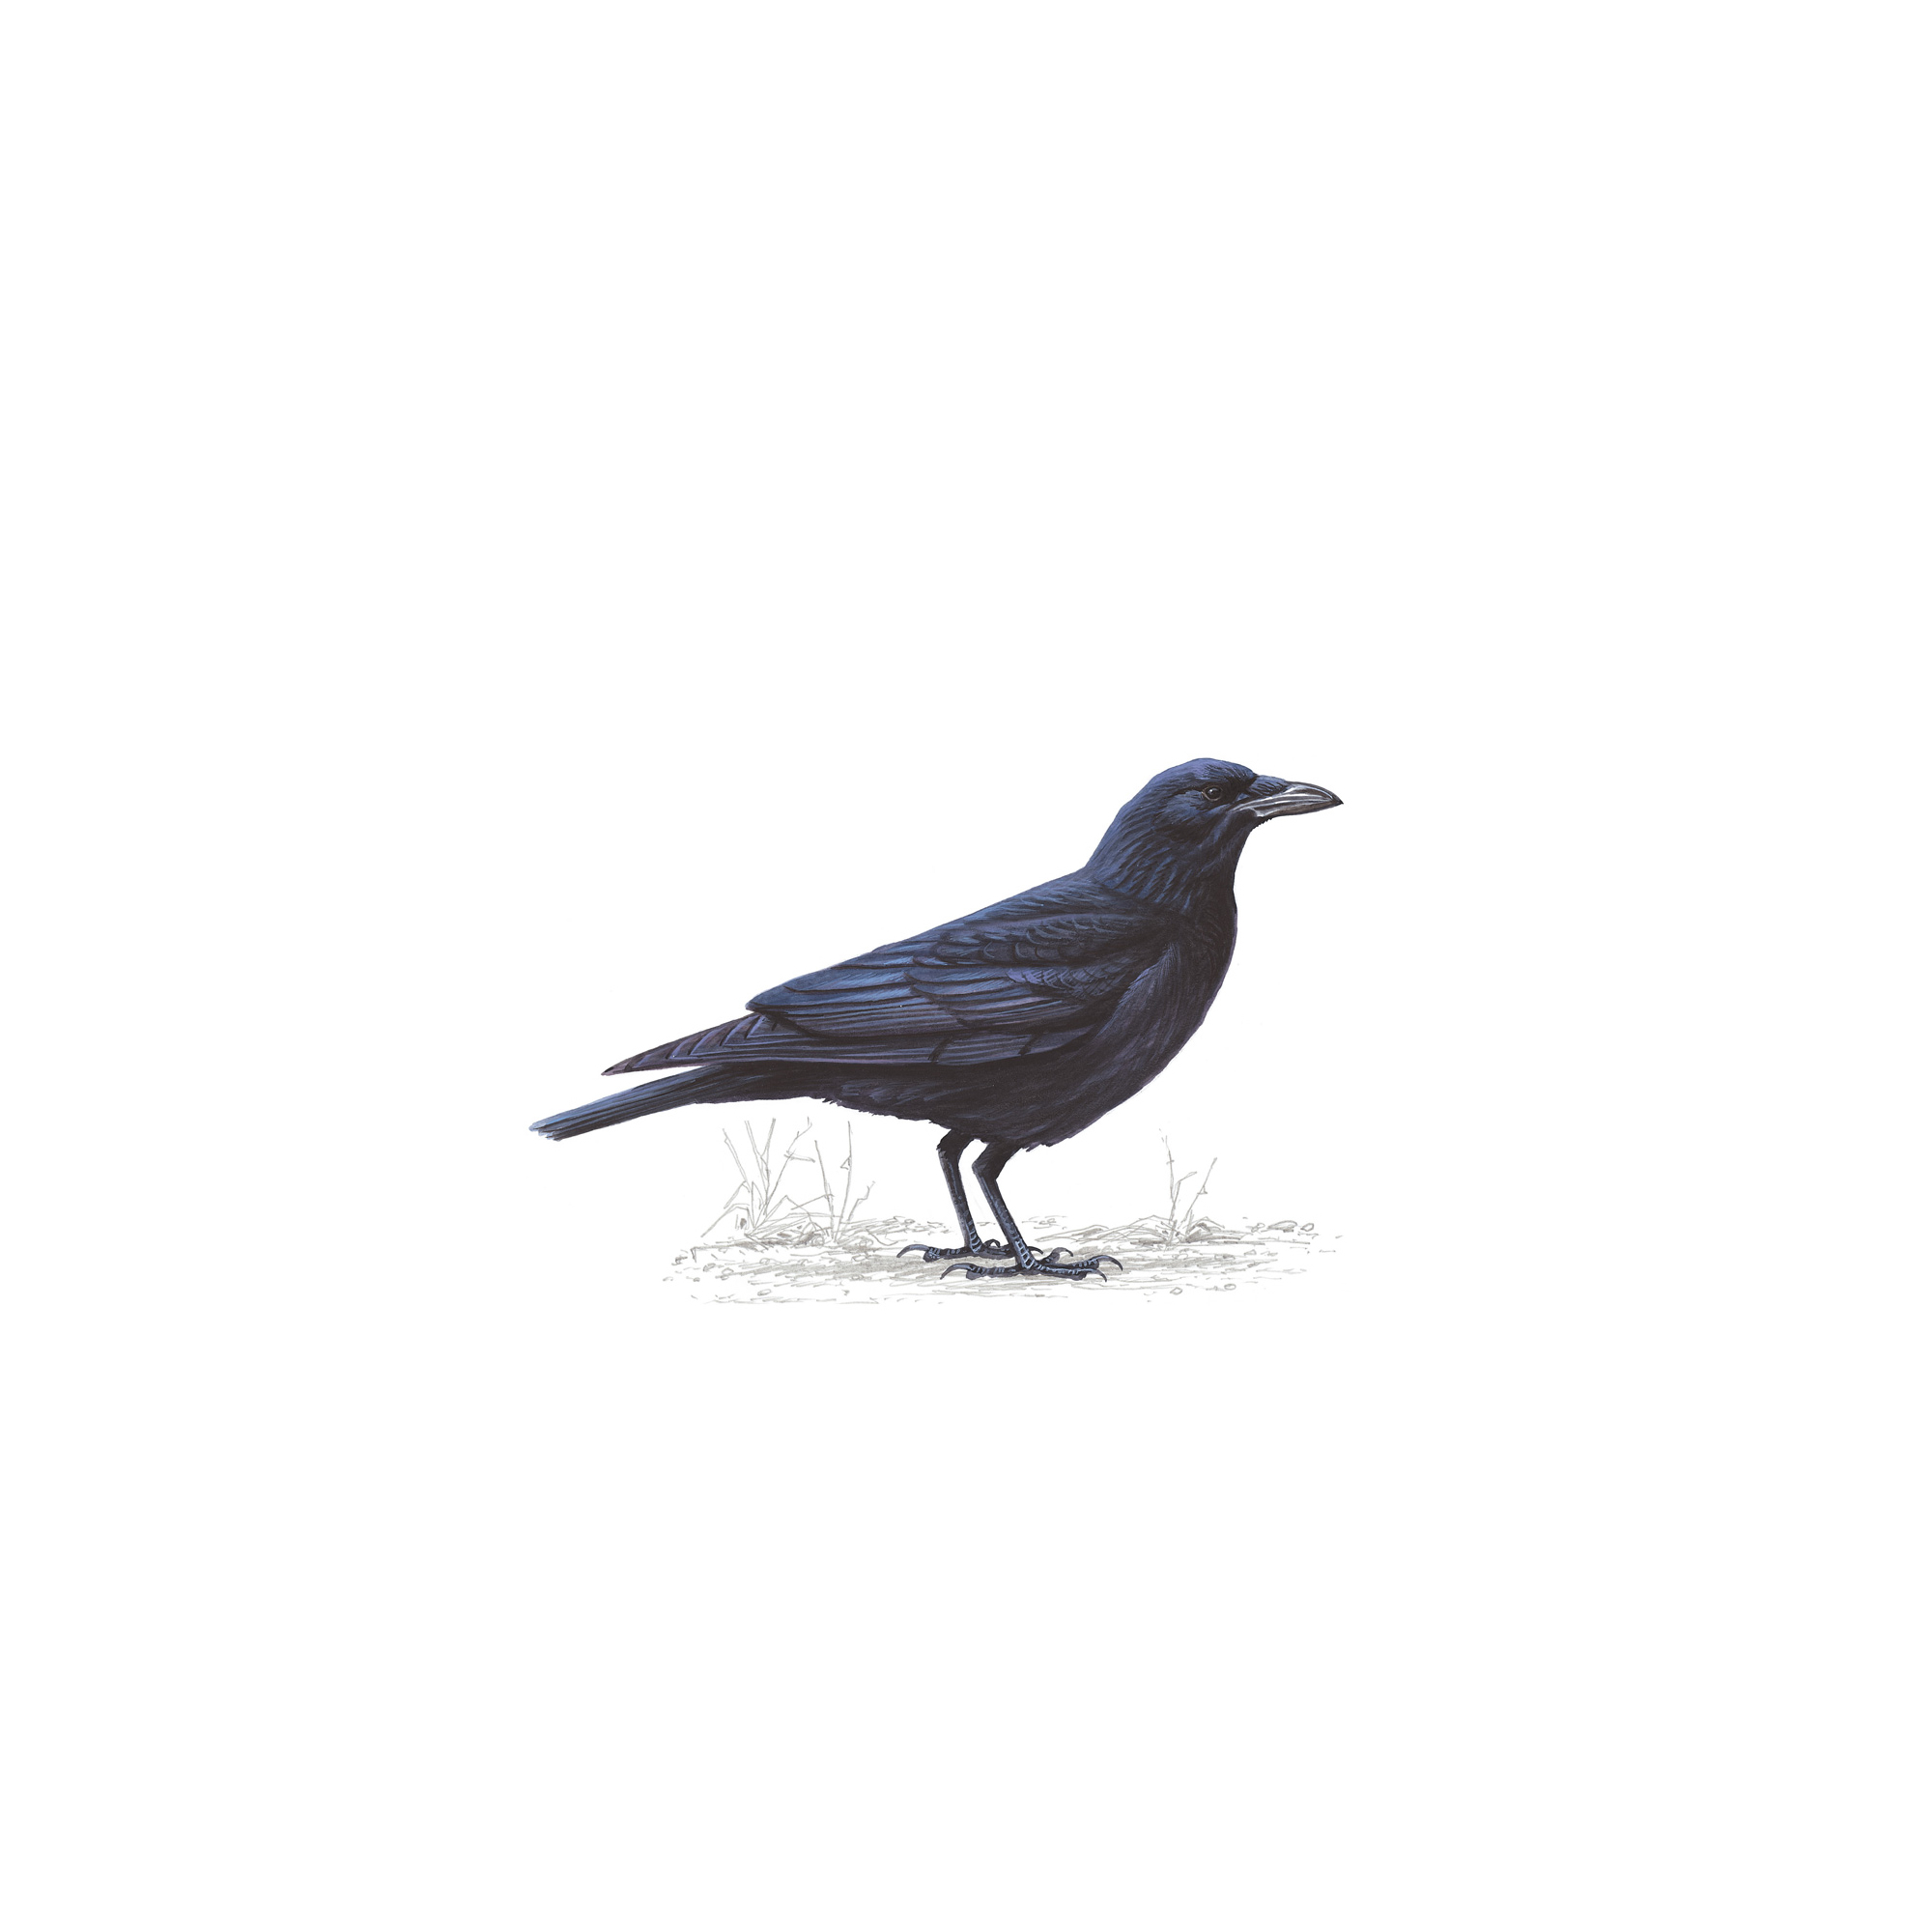 Pretty Carrion crow